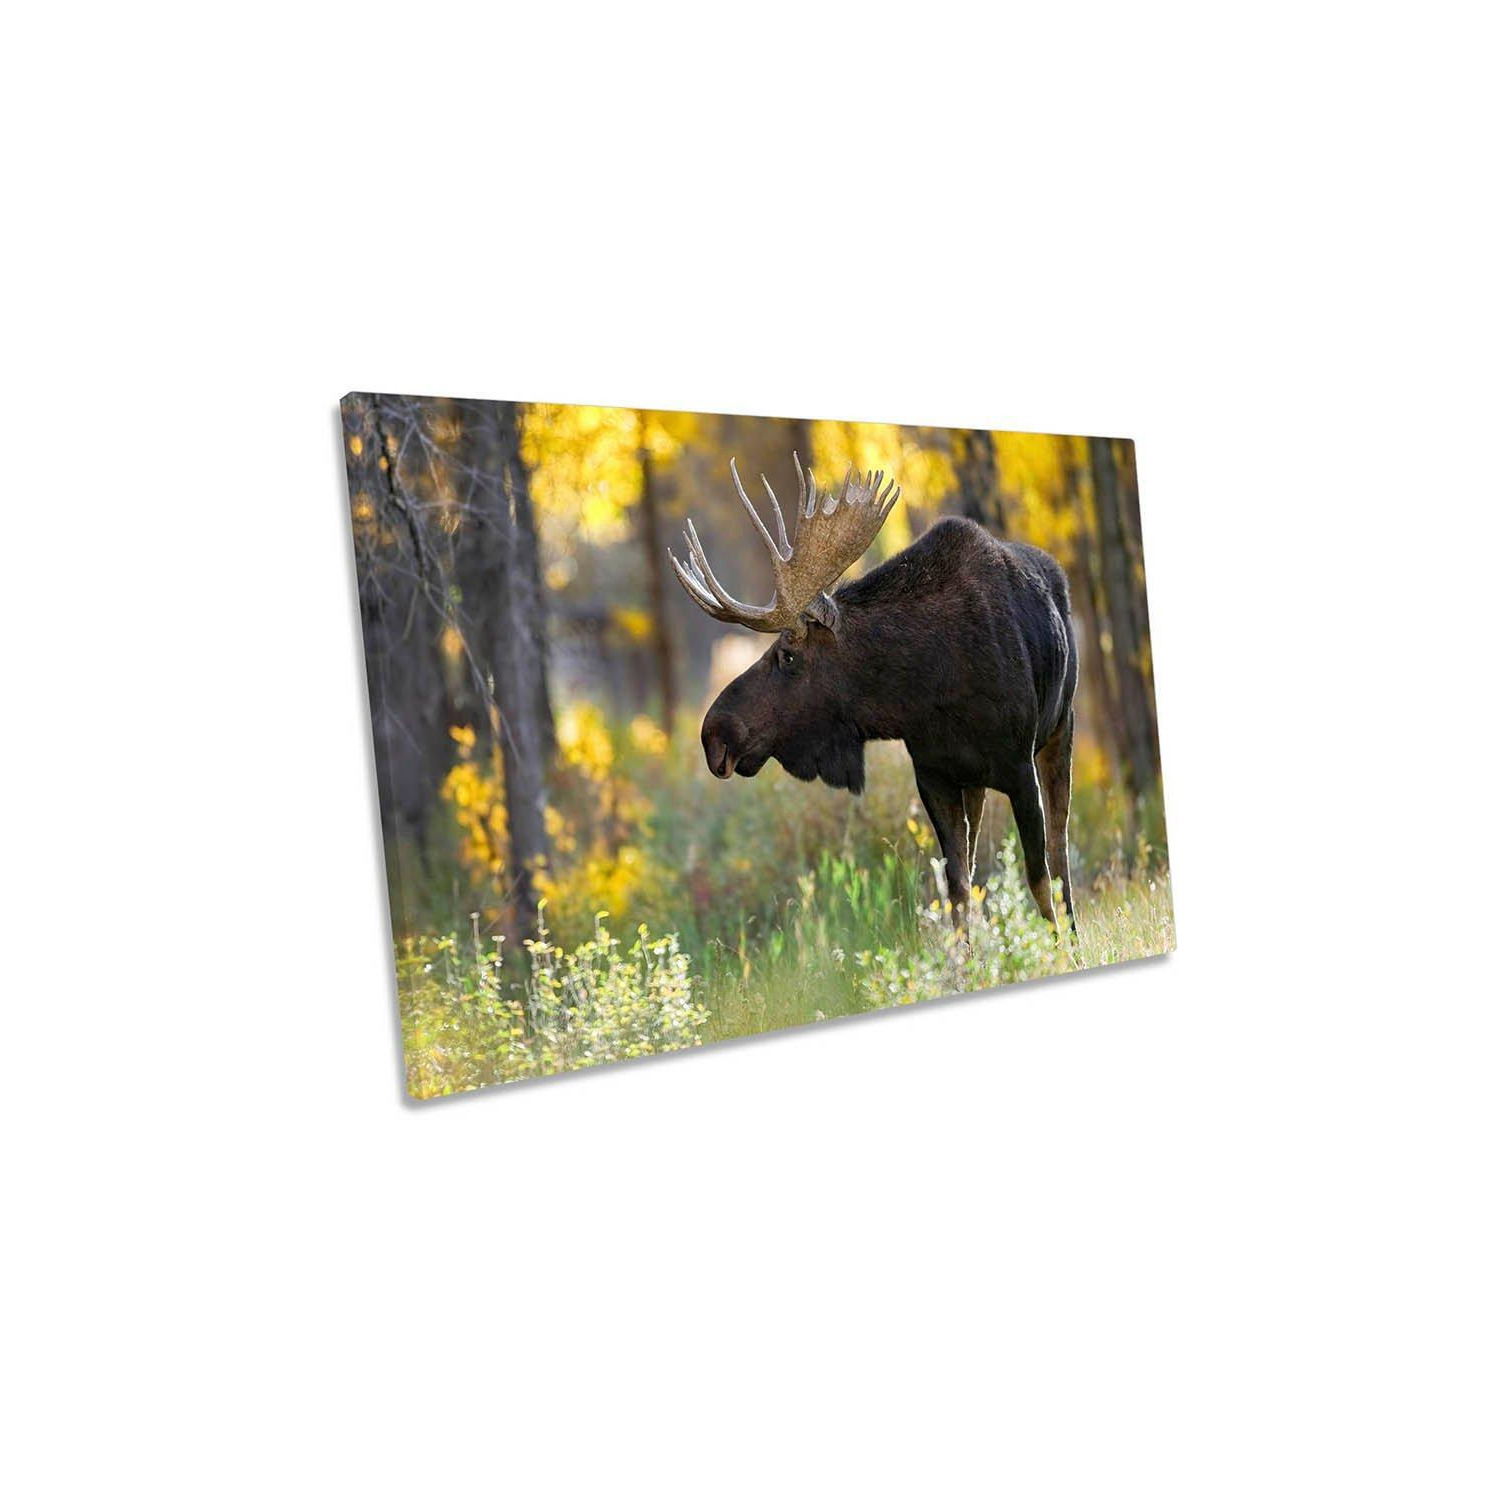 Royalty Moose Antlers Canvas Wall Art Picture Print - image 1